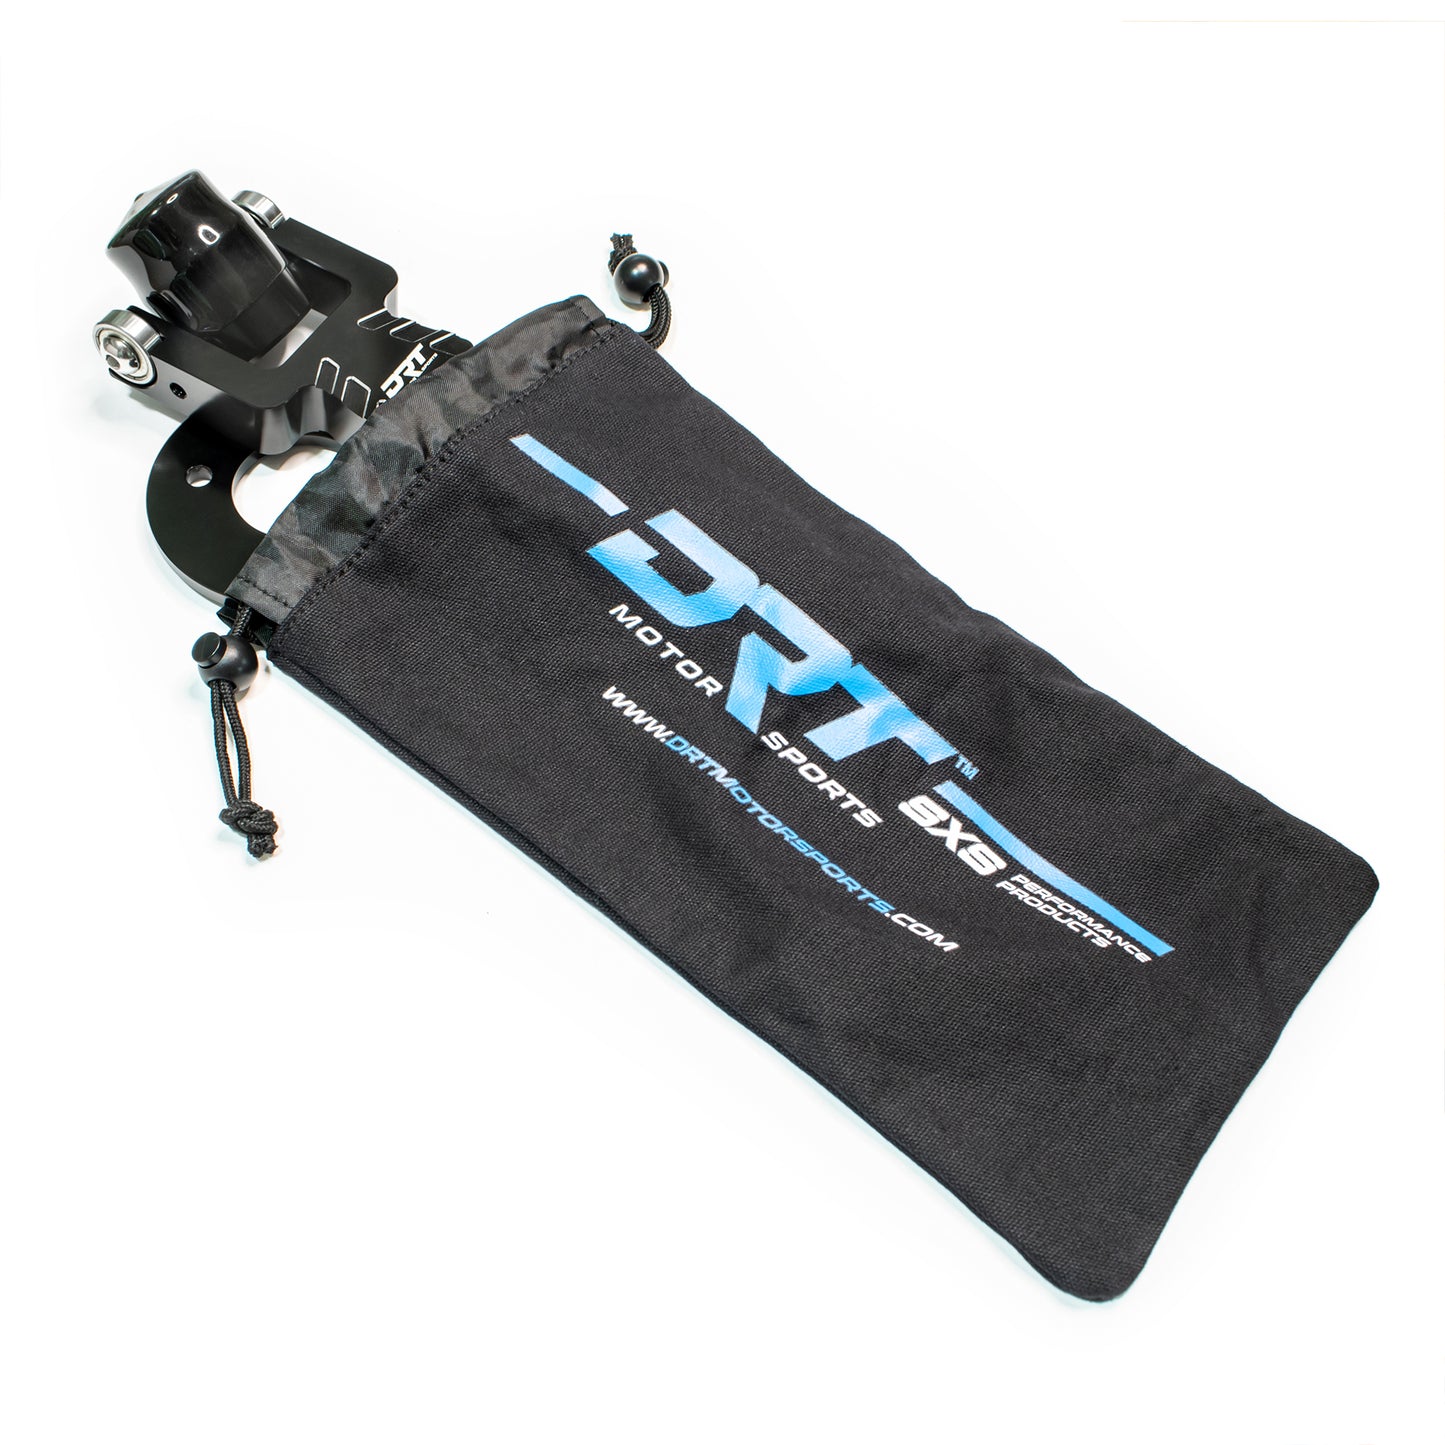 DRT Motorsports Can Am X3 Belt Replacement Tool Kit bag 